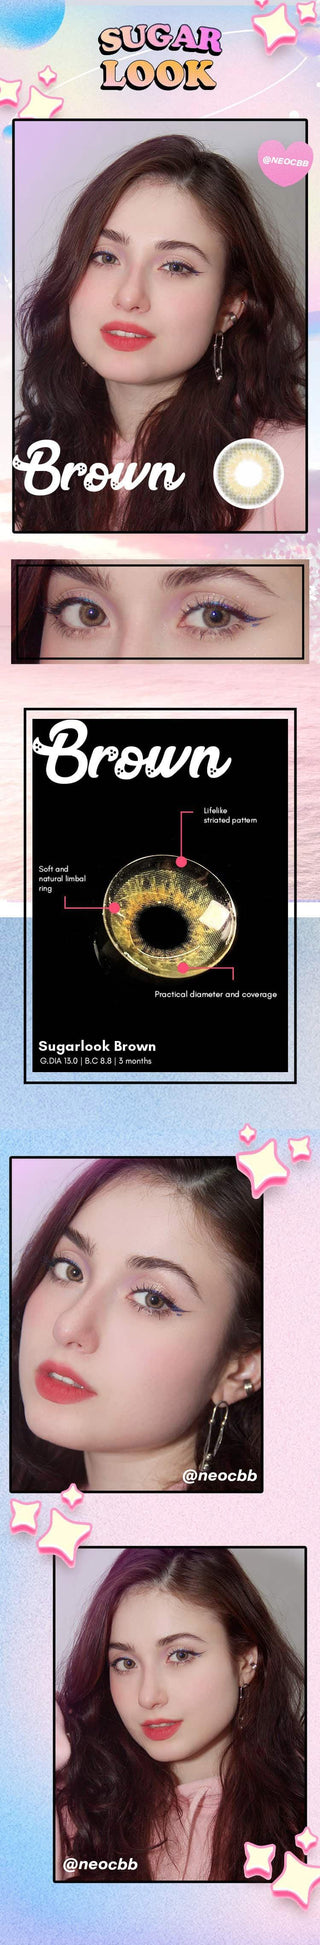 Limited Edition Sugarlook Brown Lens (1 PAIR) Color Contact Lens - EyeCandys